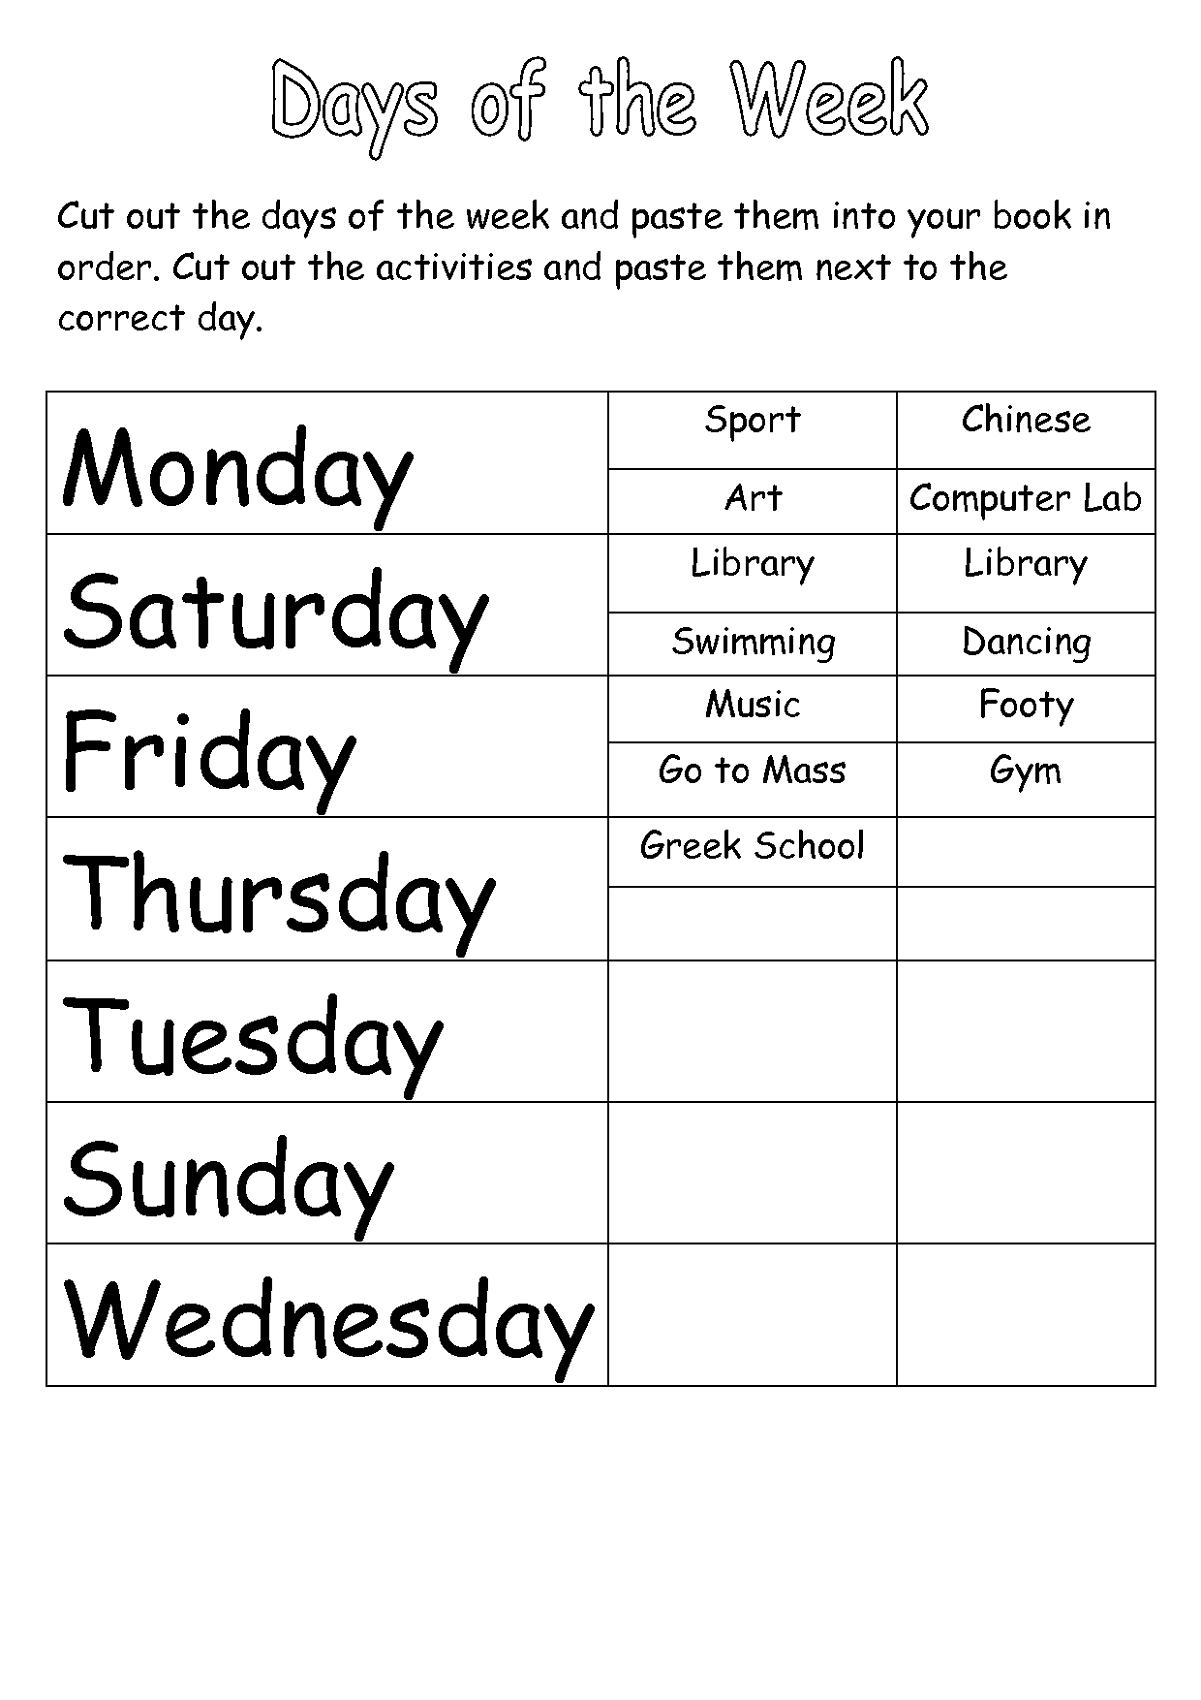 Days of the Week Activities | Activity Shelter